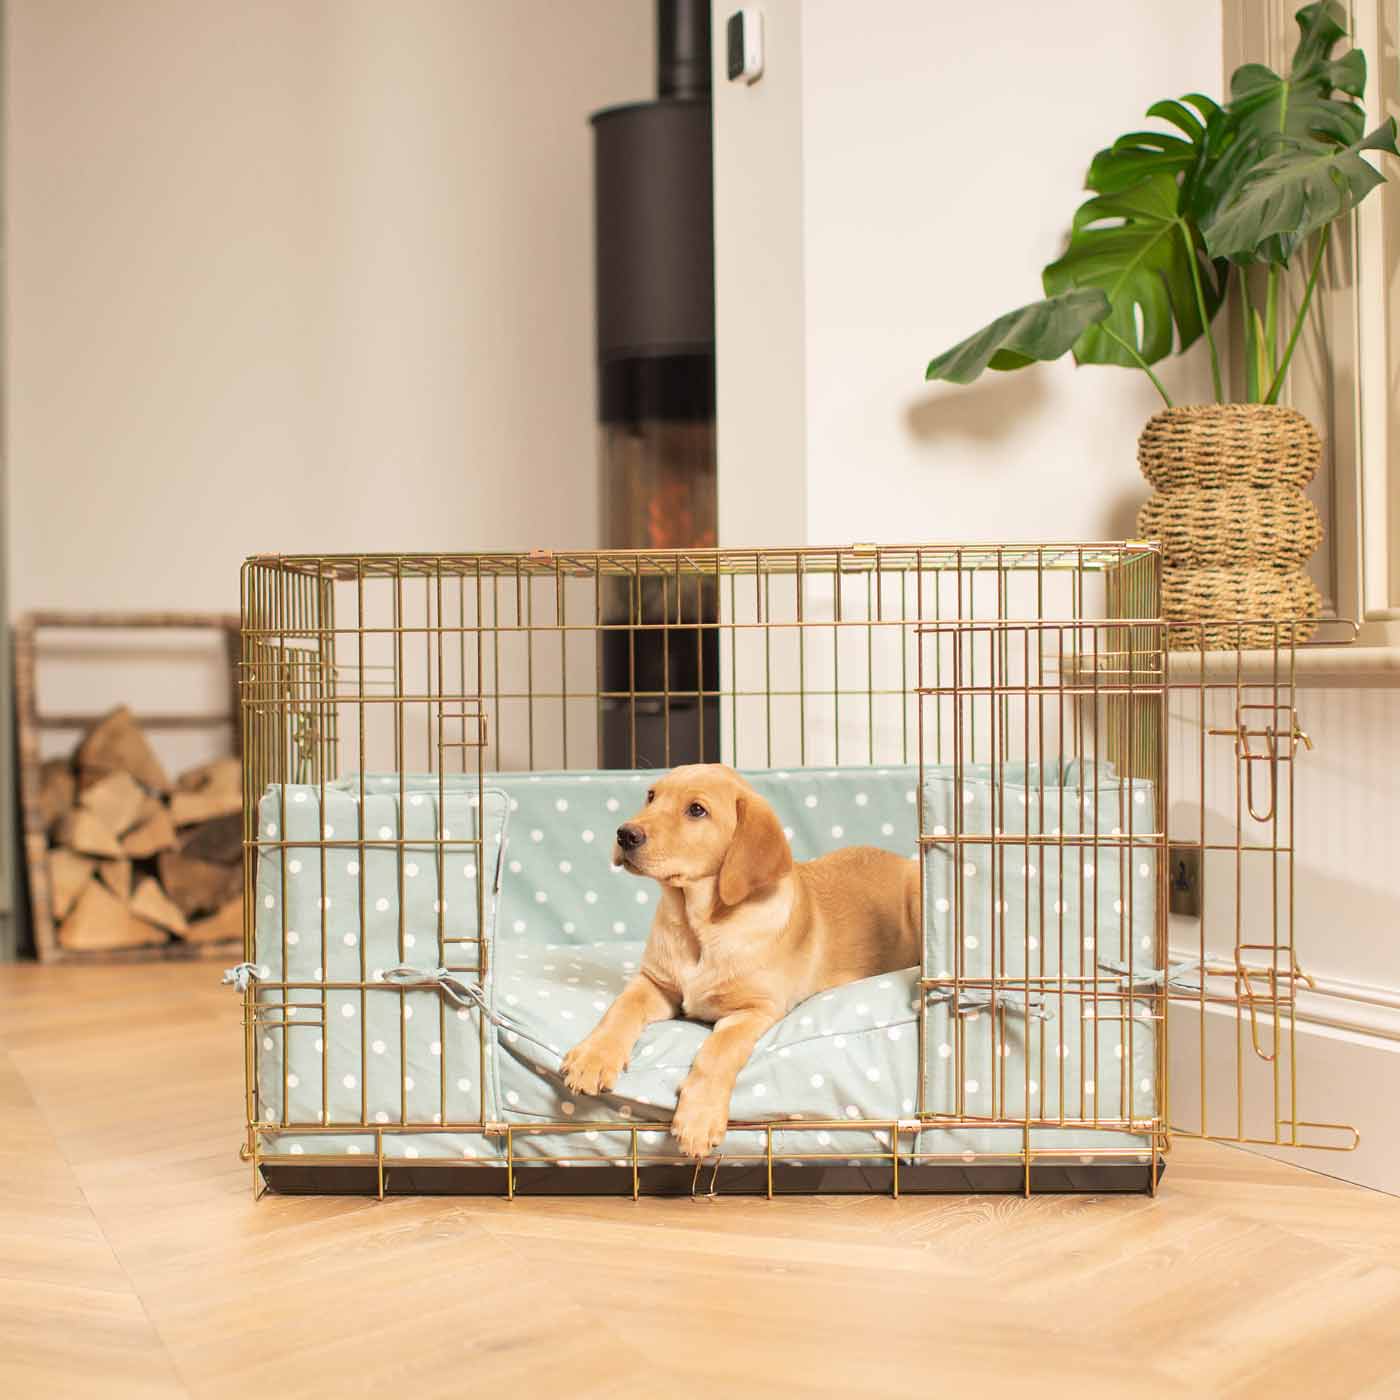 Luxury Dog Crate Bumper, Duck Egg Spot Crate Bumper Cover The Perfect Dog Crate Accessory, Available To Personalise Now at Lords & Labradors